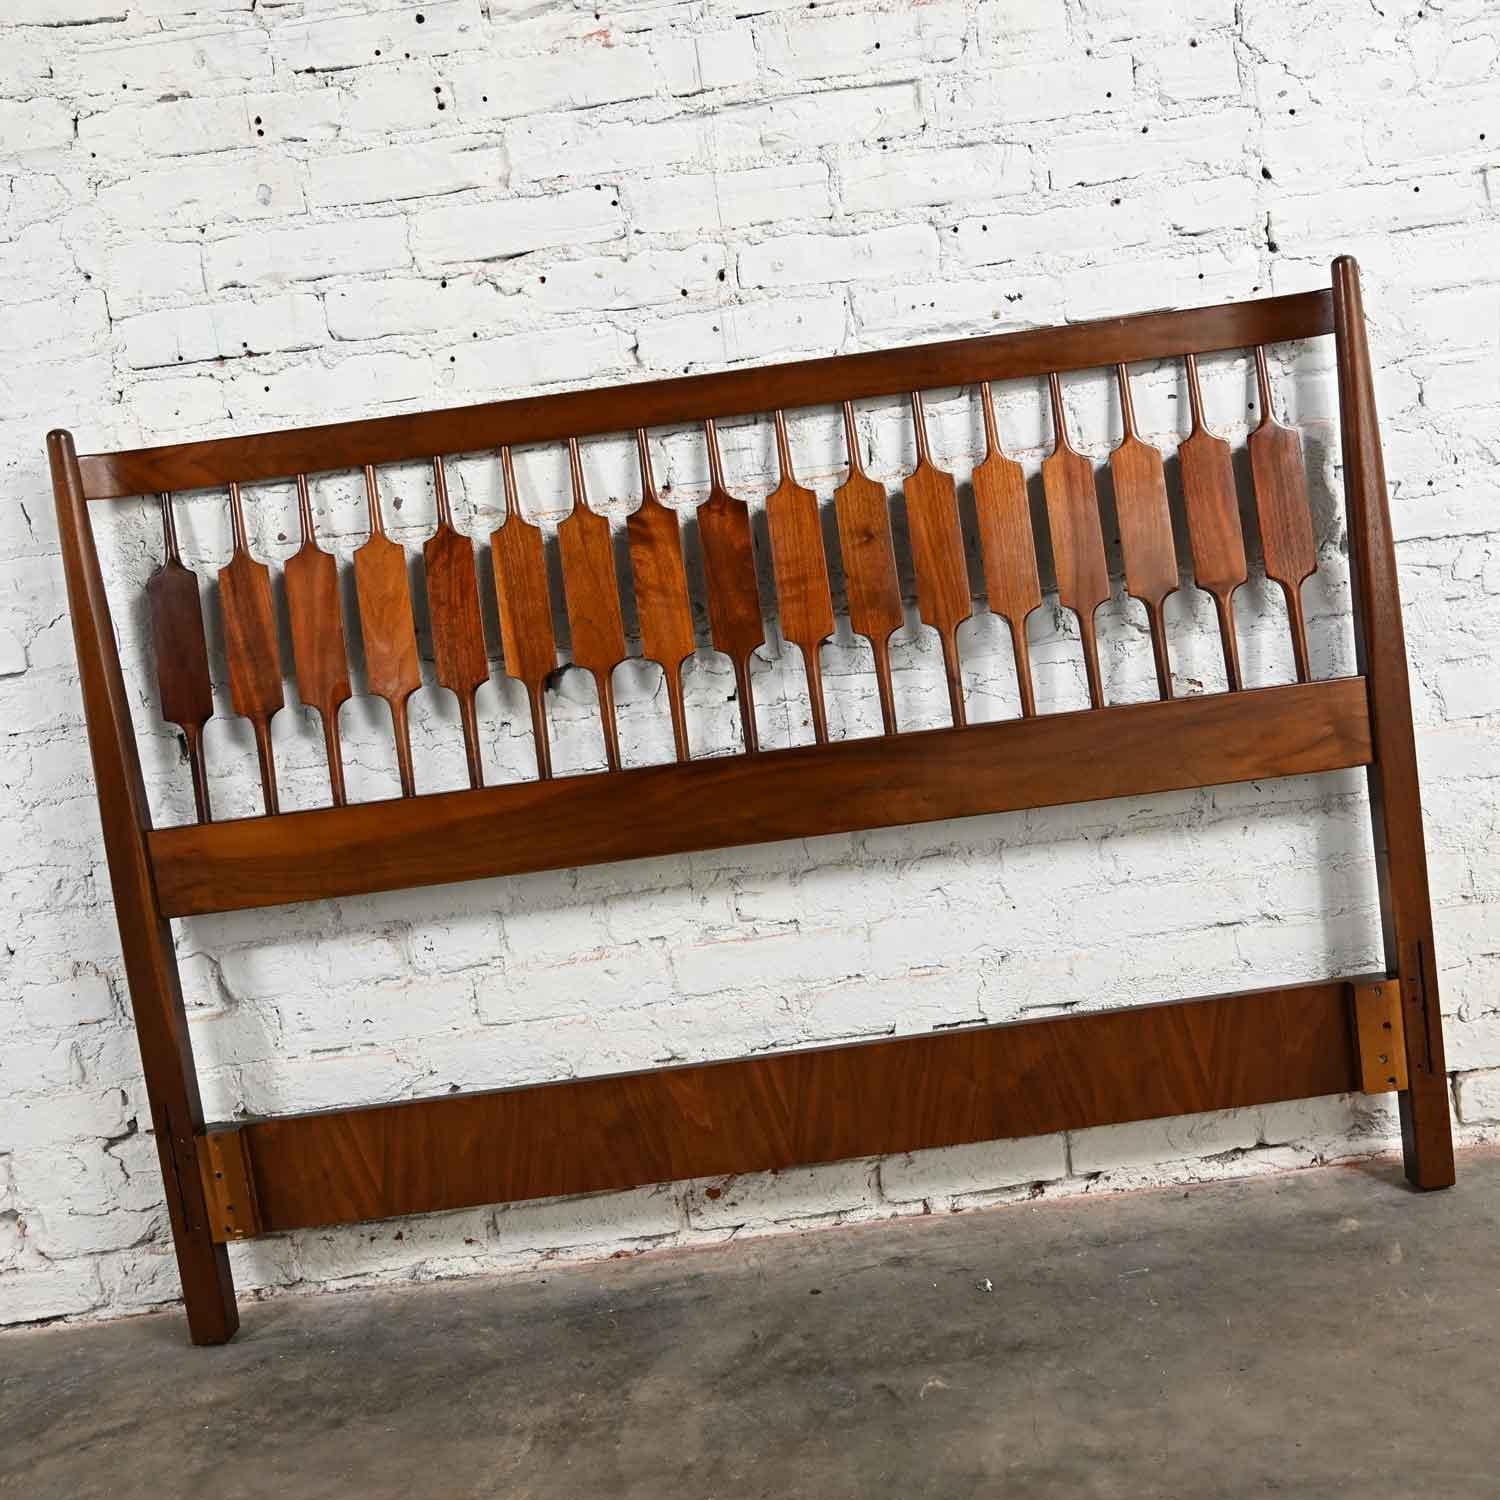 Handsome vintage MCM or Mid-Century Modern Drexel Declaration full size walnut headboard by Kipp Stewart & Stewart MacDougall. Beautiful condition, keeping in mind that this is vintage and not new so will have signs of use and wear. A chip on the